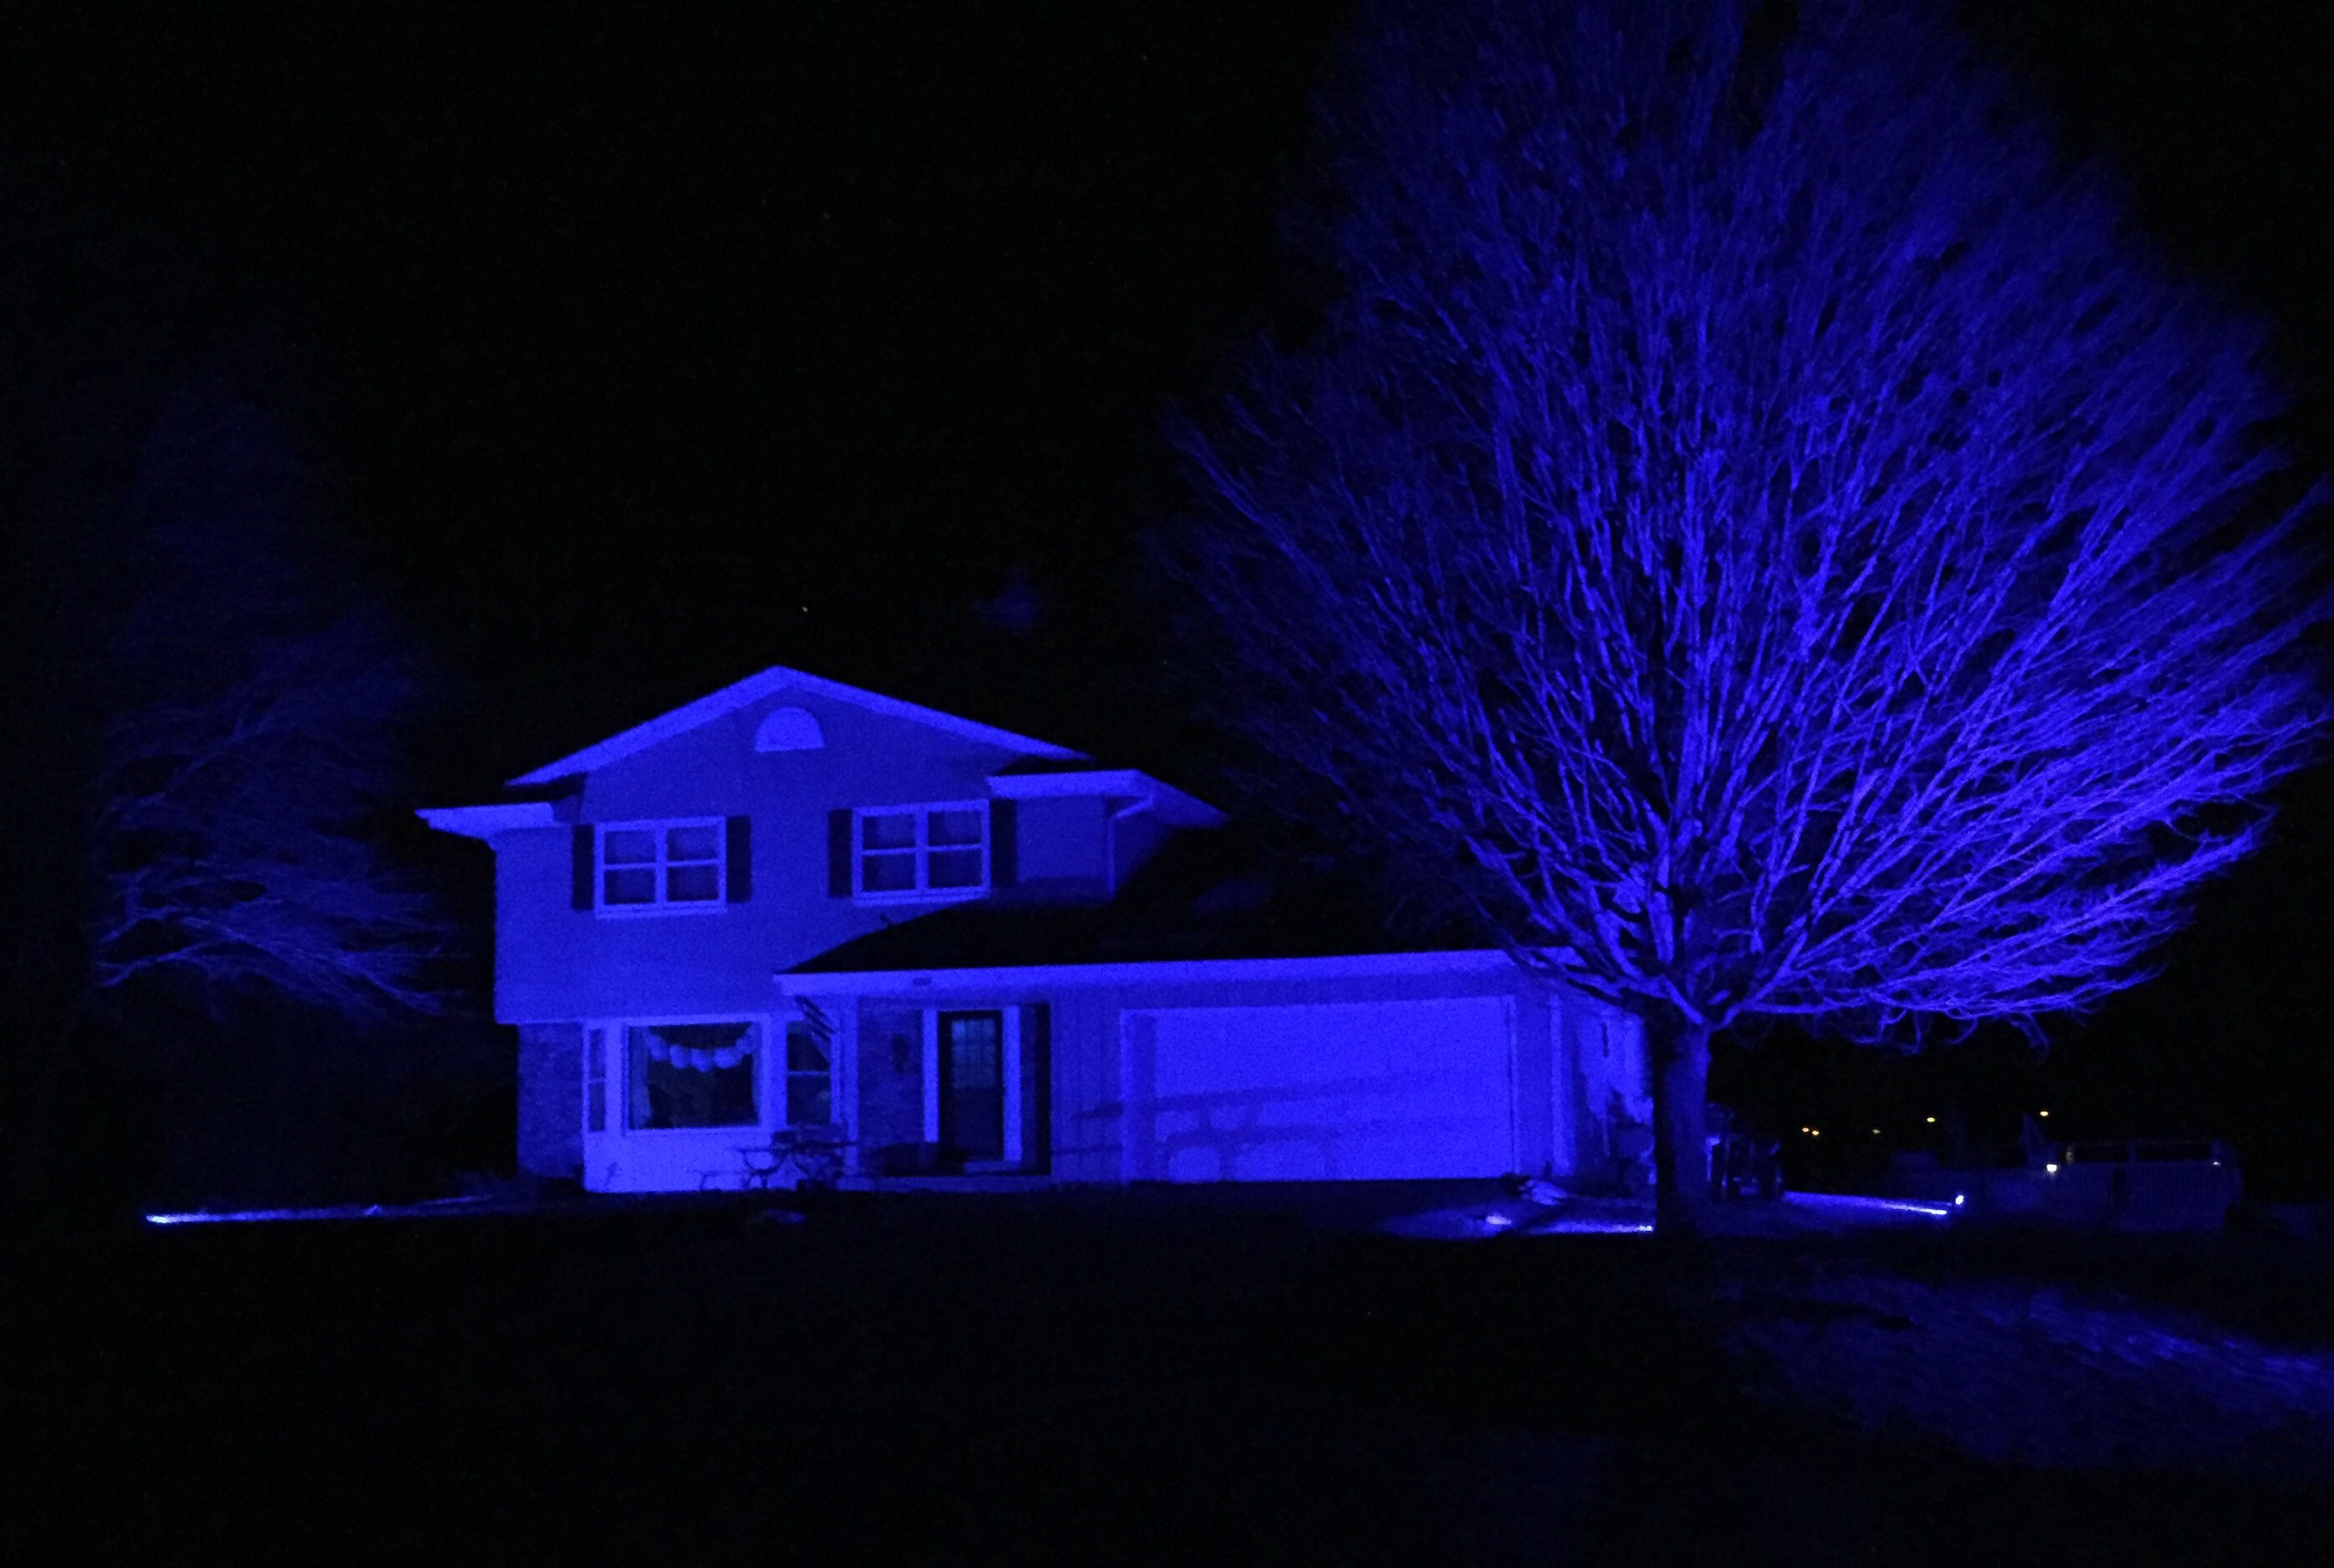 Quin's house for LIUB day 2016